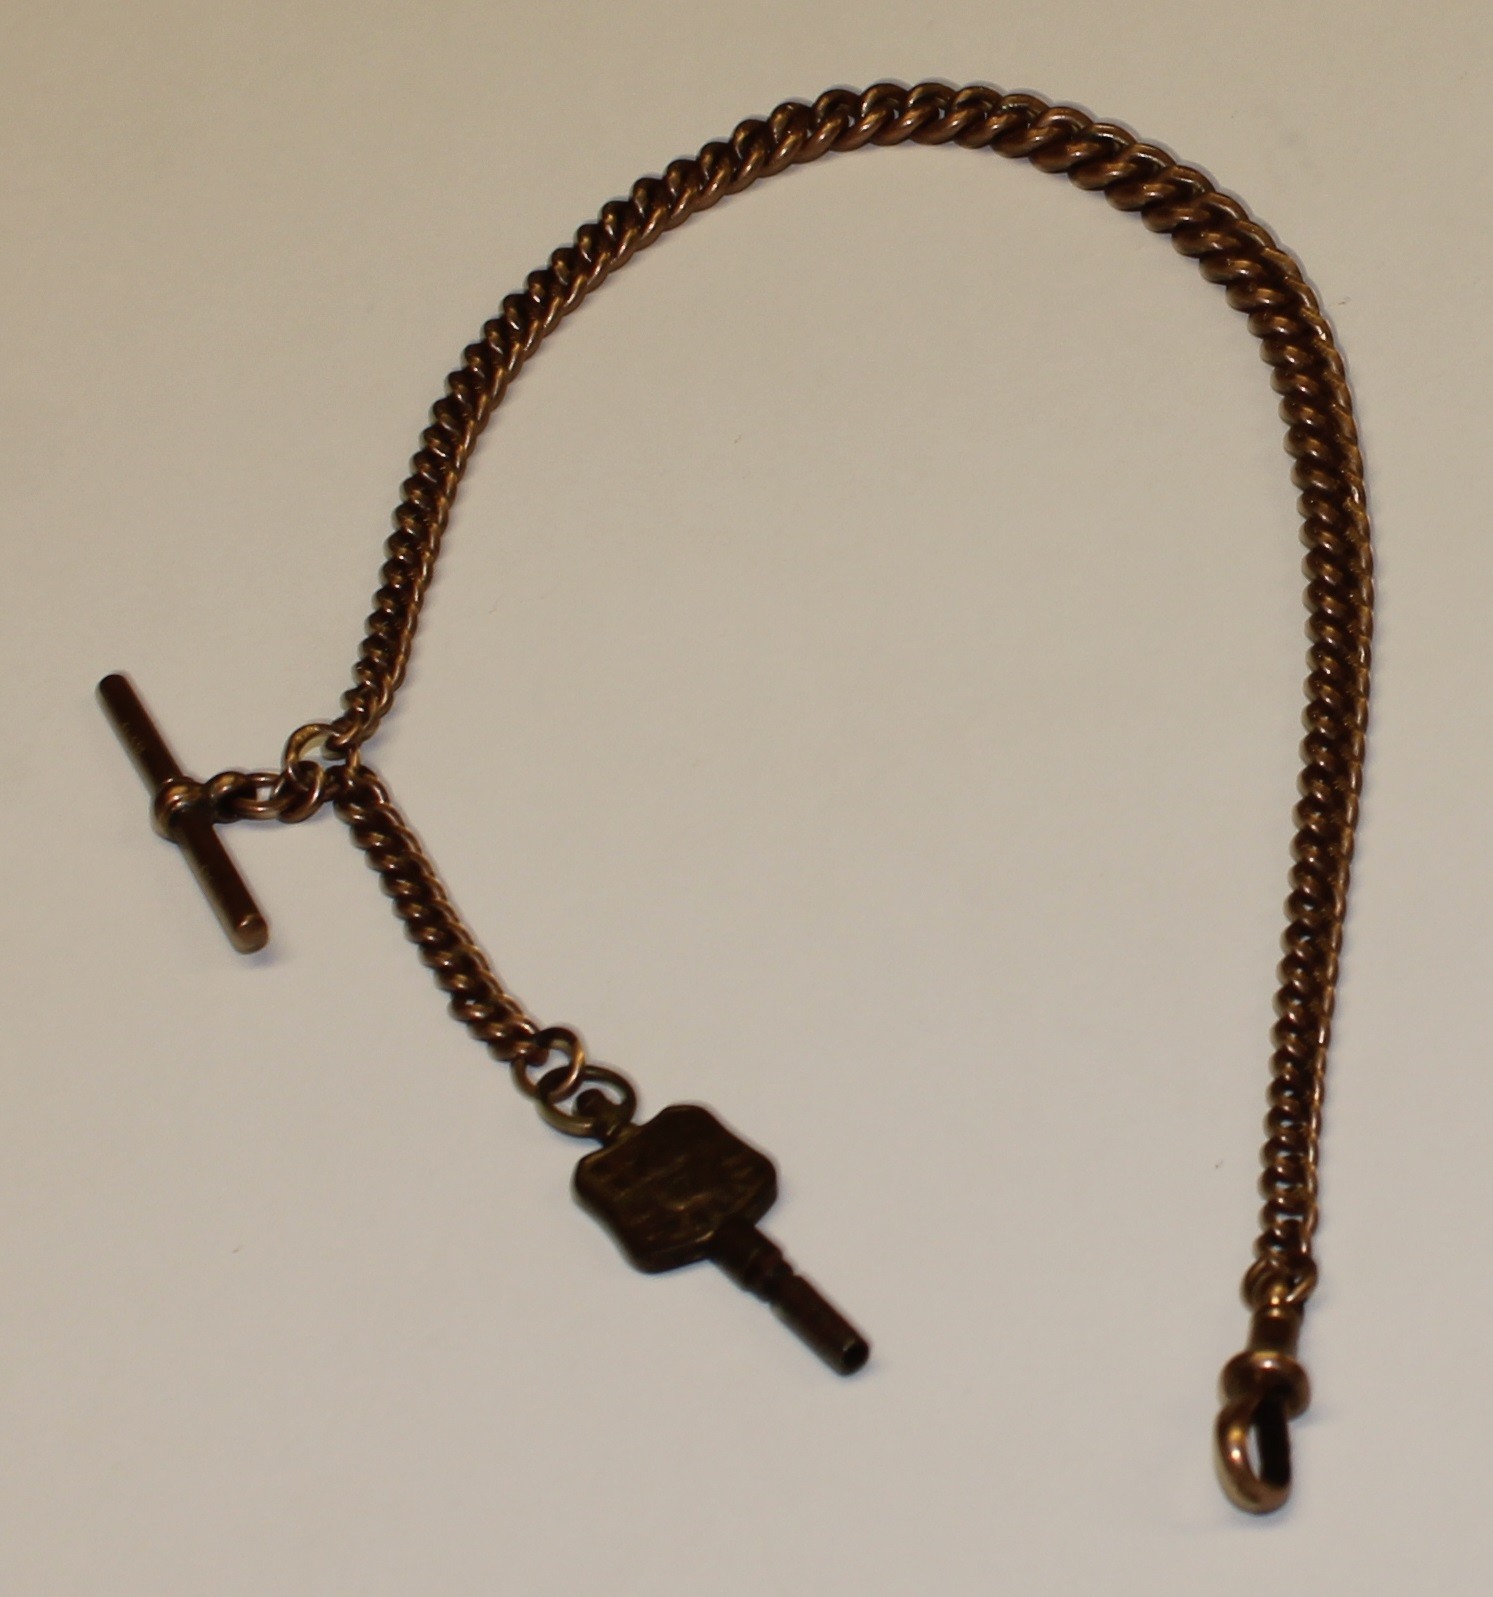 A 9ct rose gold Albert chain with 9ct rose gold t-bar, and a metal pocket watch key, 34g